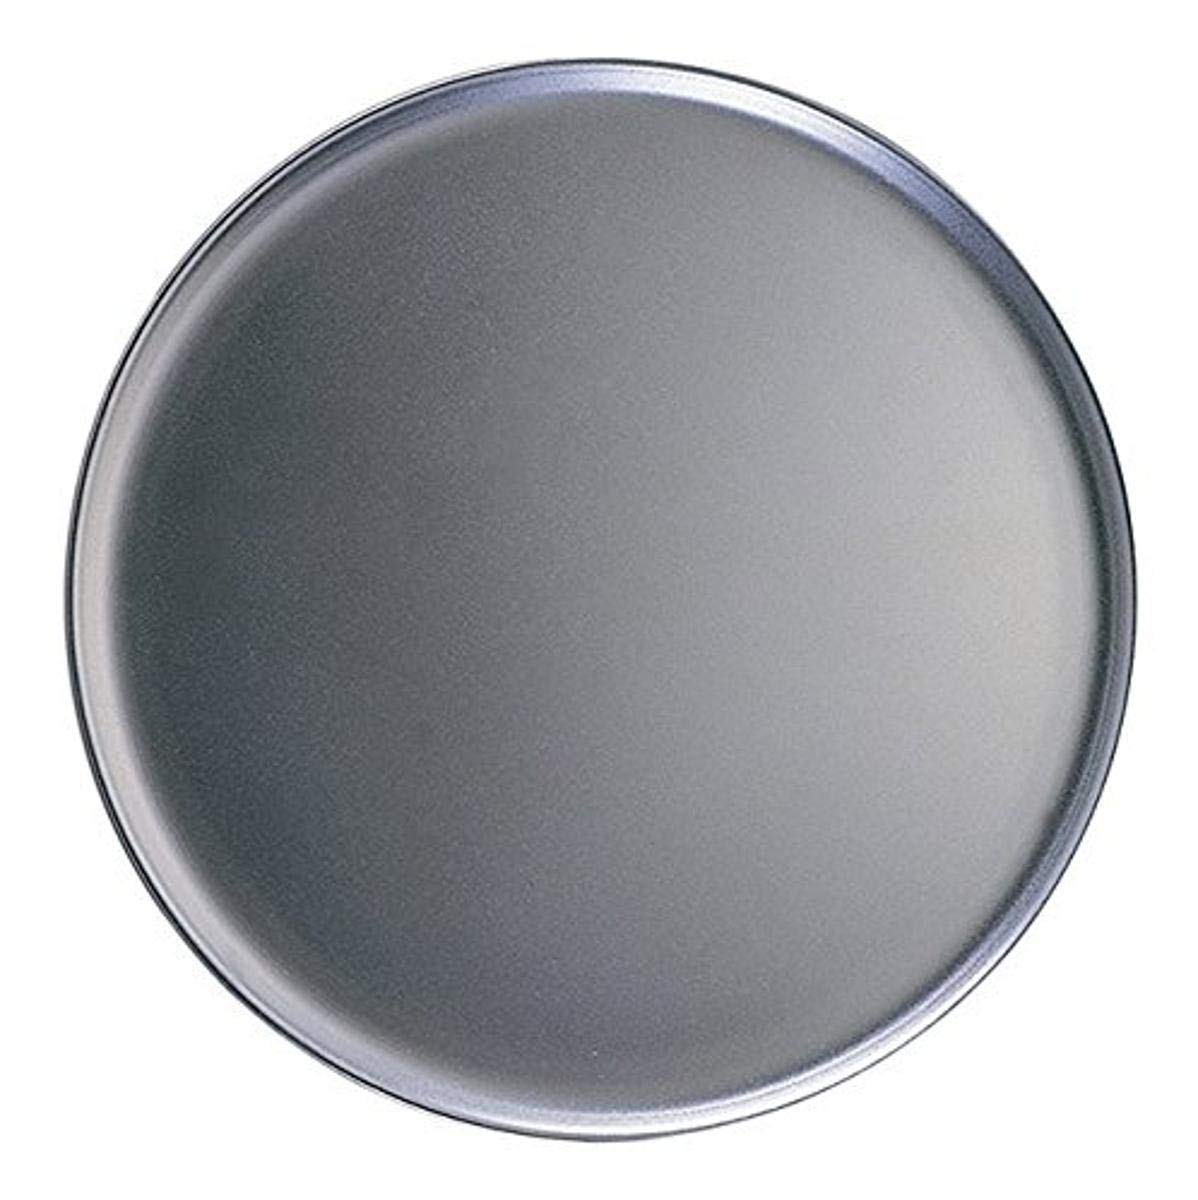 Aluminum Coupe Style Pan Heavy Weight, 14 Gauge Thickness, 26" Diameter American Metalcraft HACTP26 $9.89 at Amazon